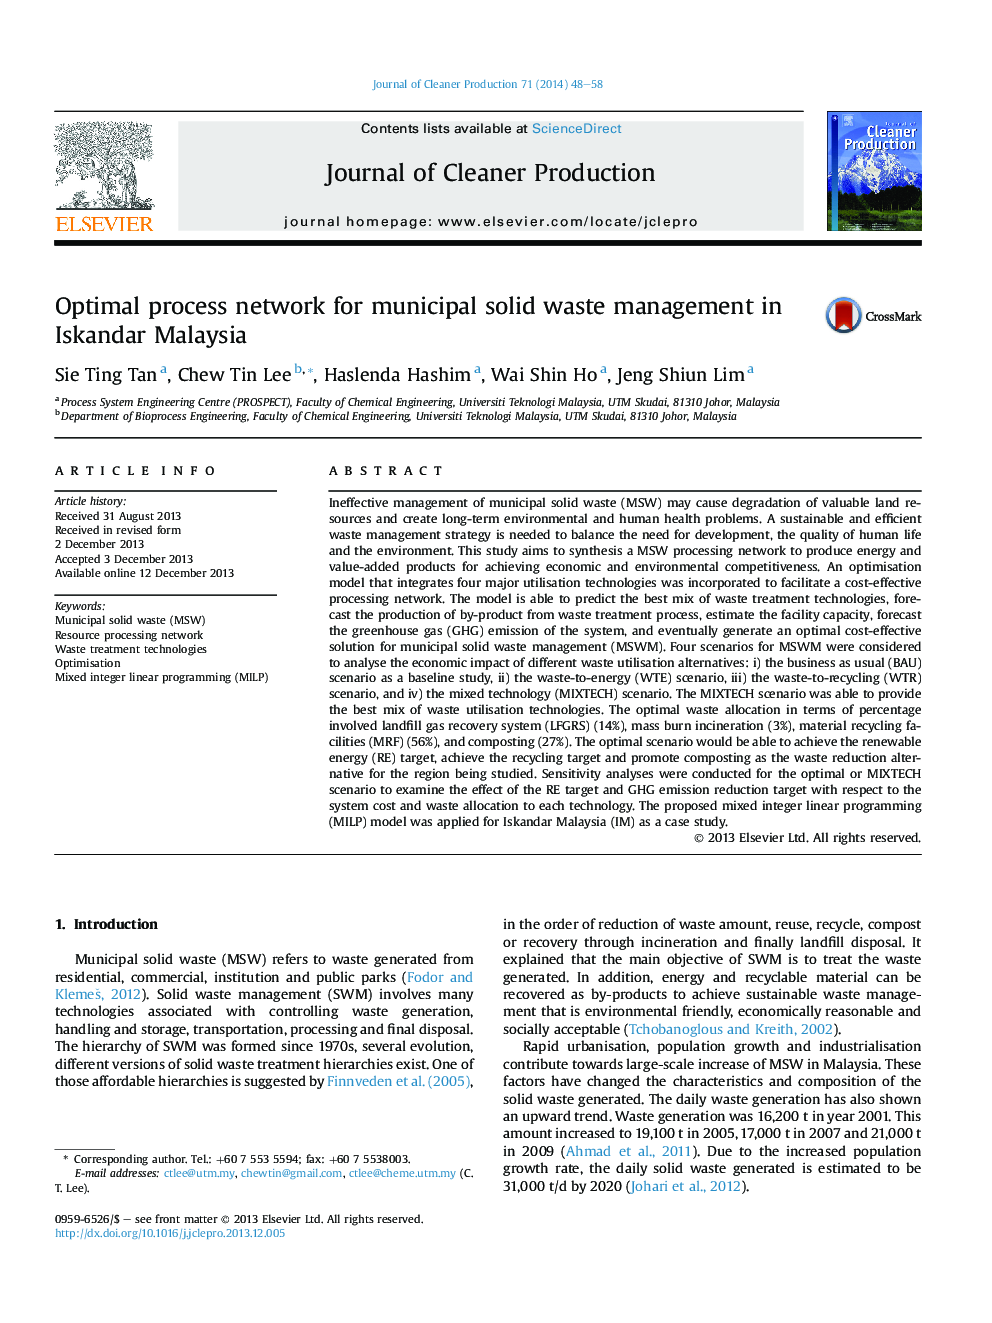 Optimal process network for municipal solid waste management in Iskandar Malaysia